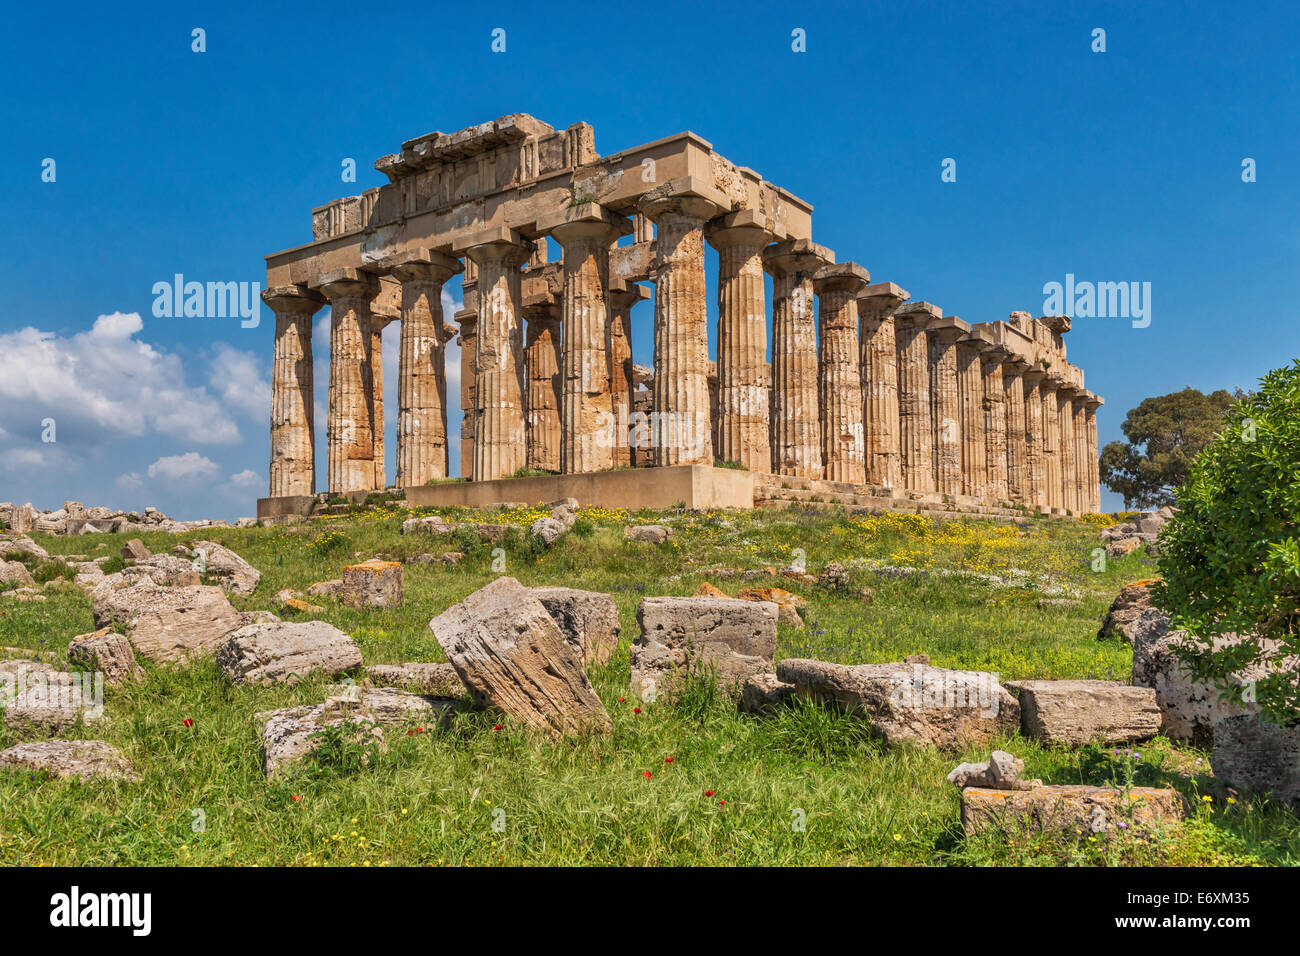 Temple of Hera was built about 470 to 450 BC. The Temple belongs to the archaeological sites of Selinunte, Sicily, Italy, Europe Stock Photo